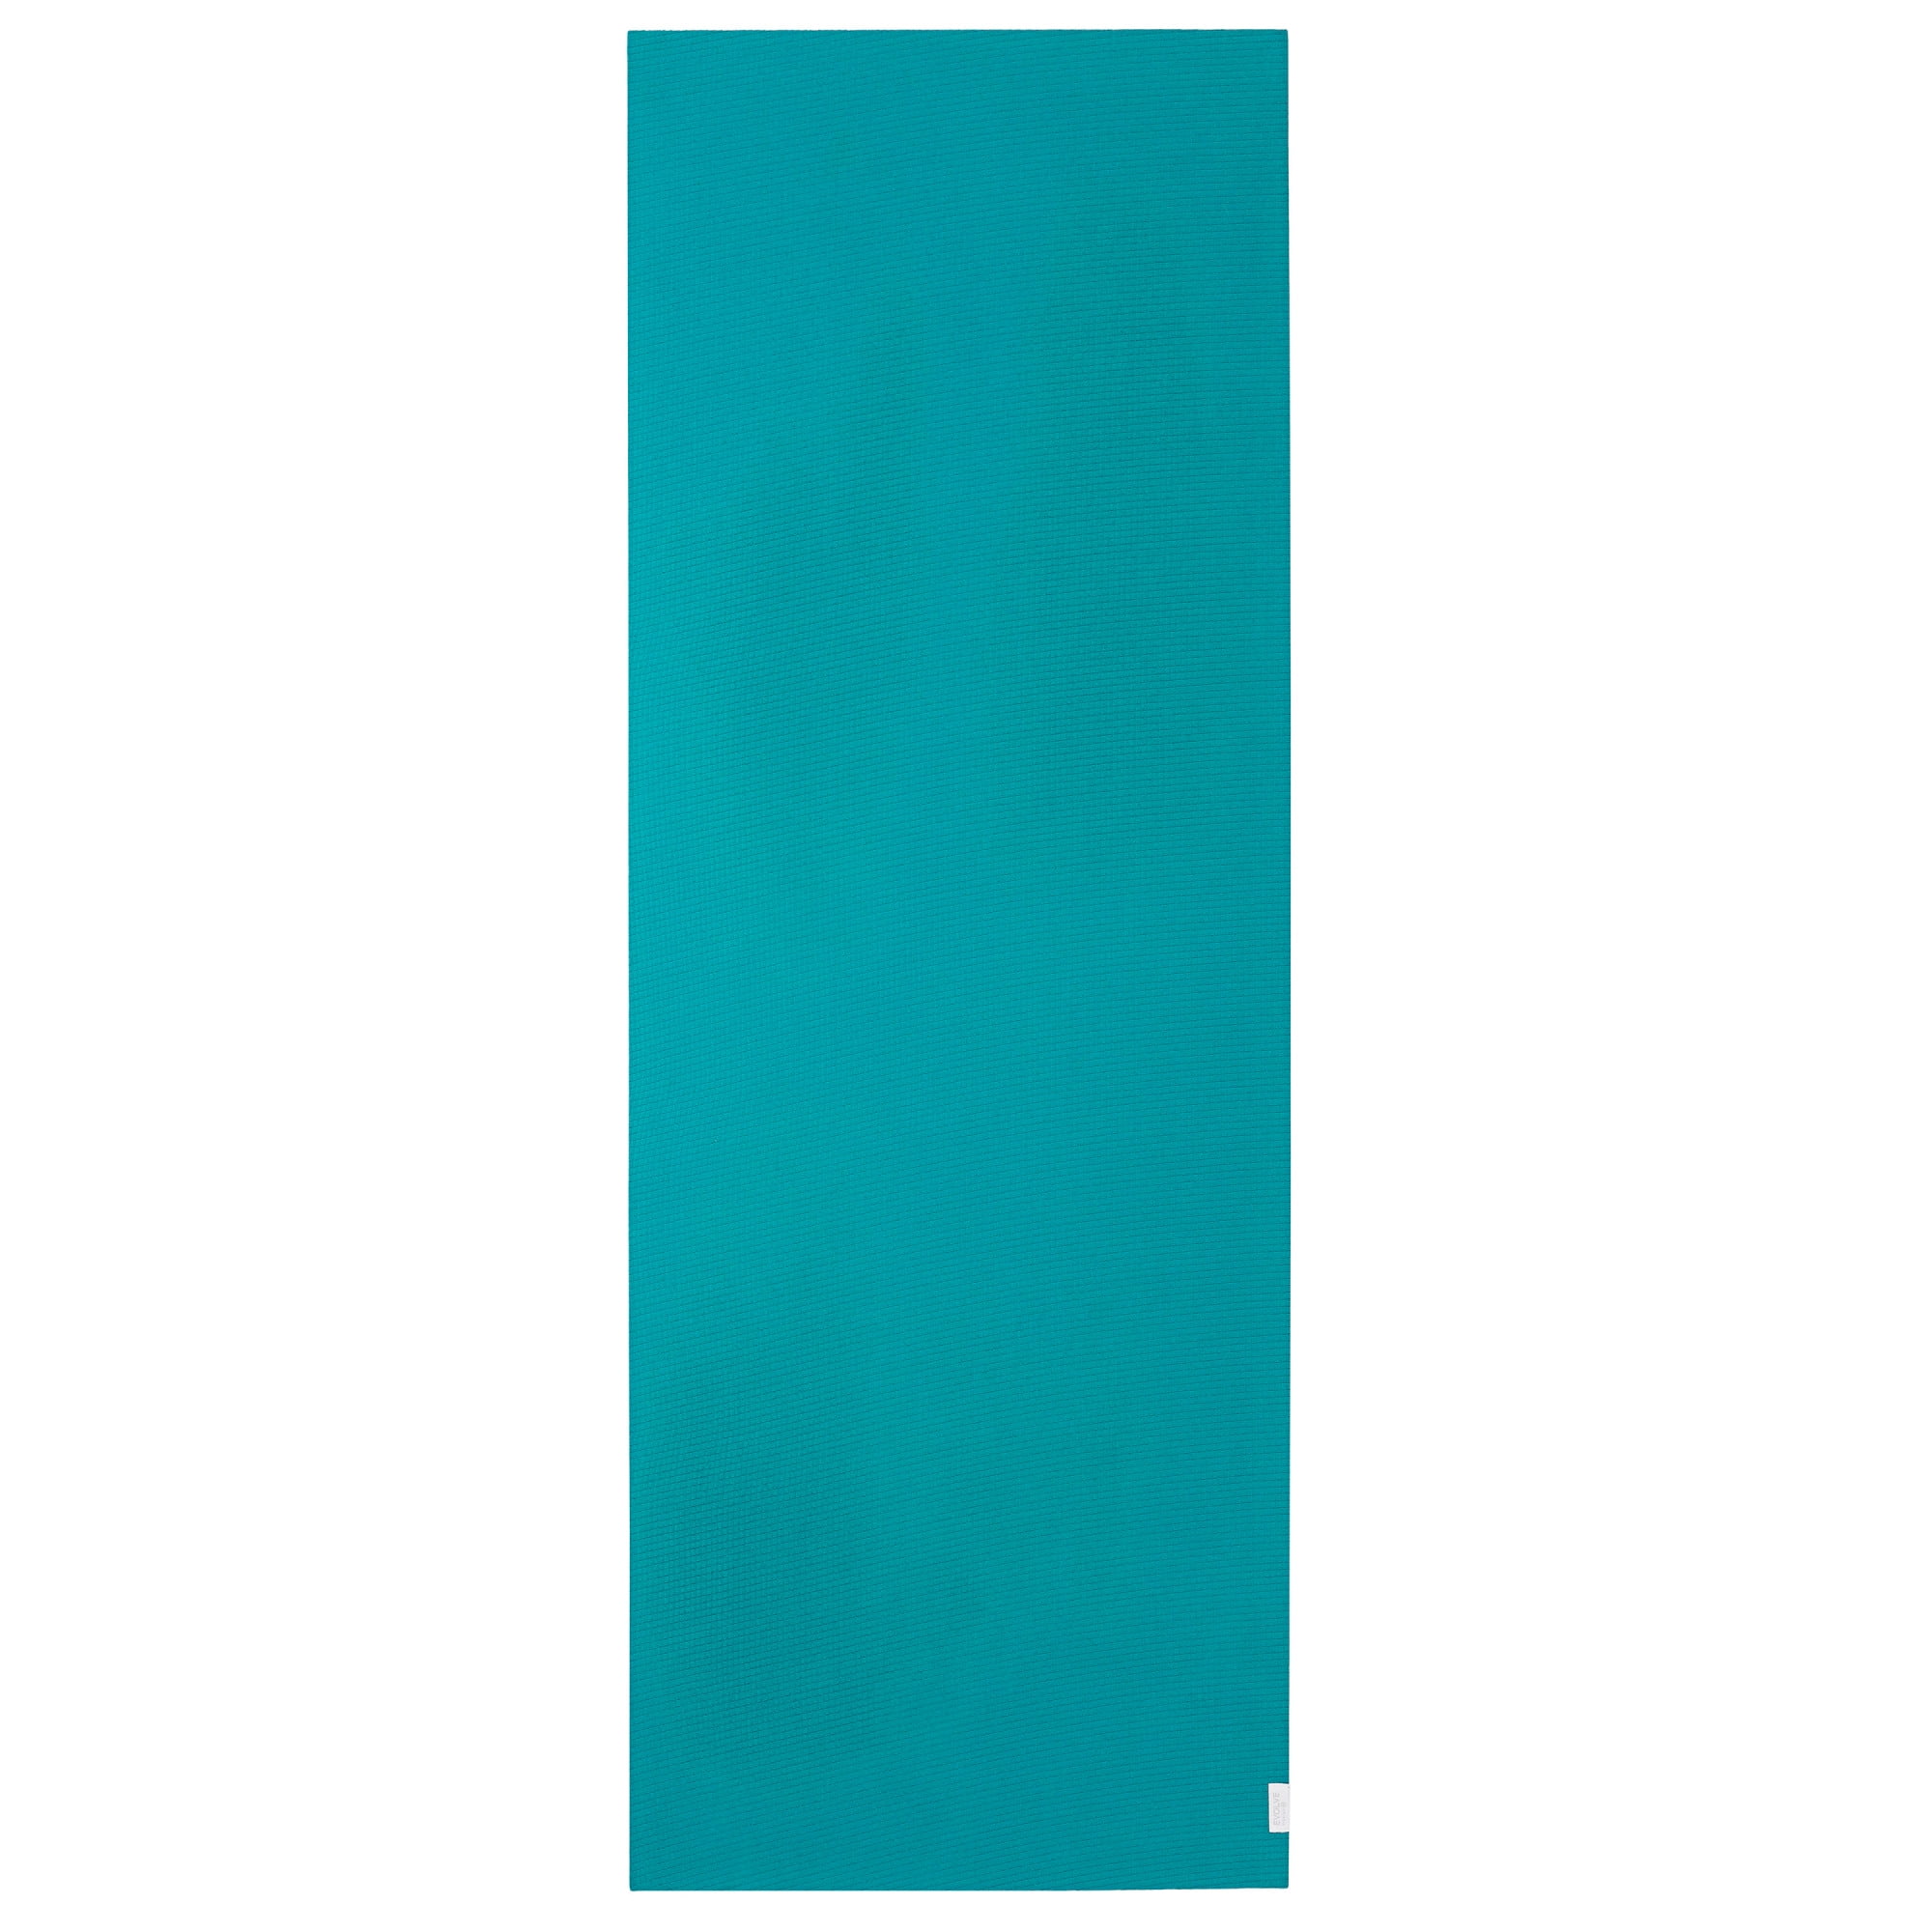 Evolve by Gaiam No-Slip Yoga/Pilates Mat Towel, Teal and Grey